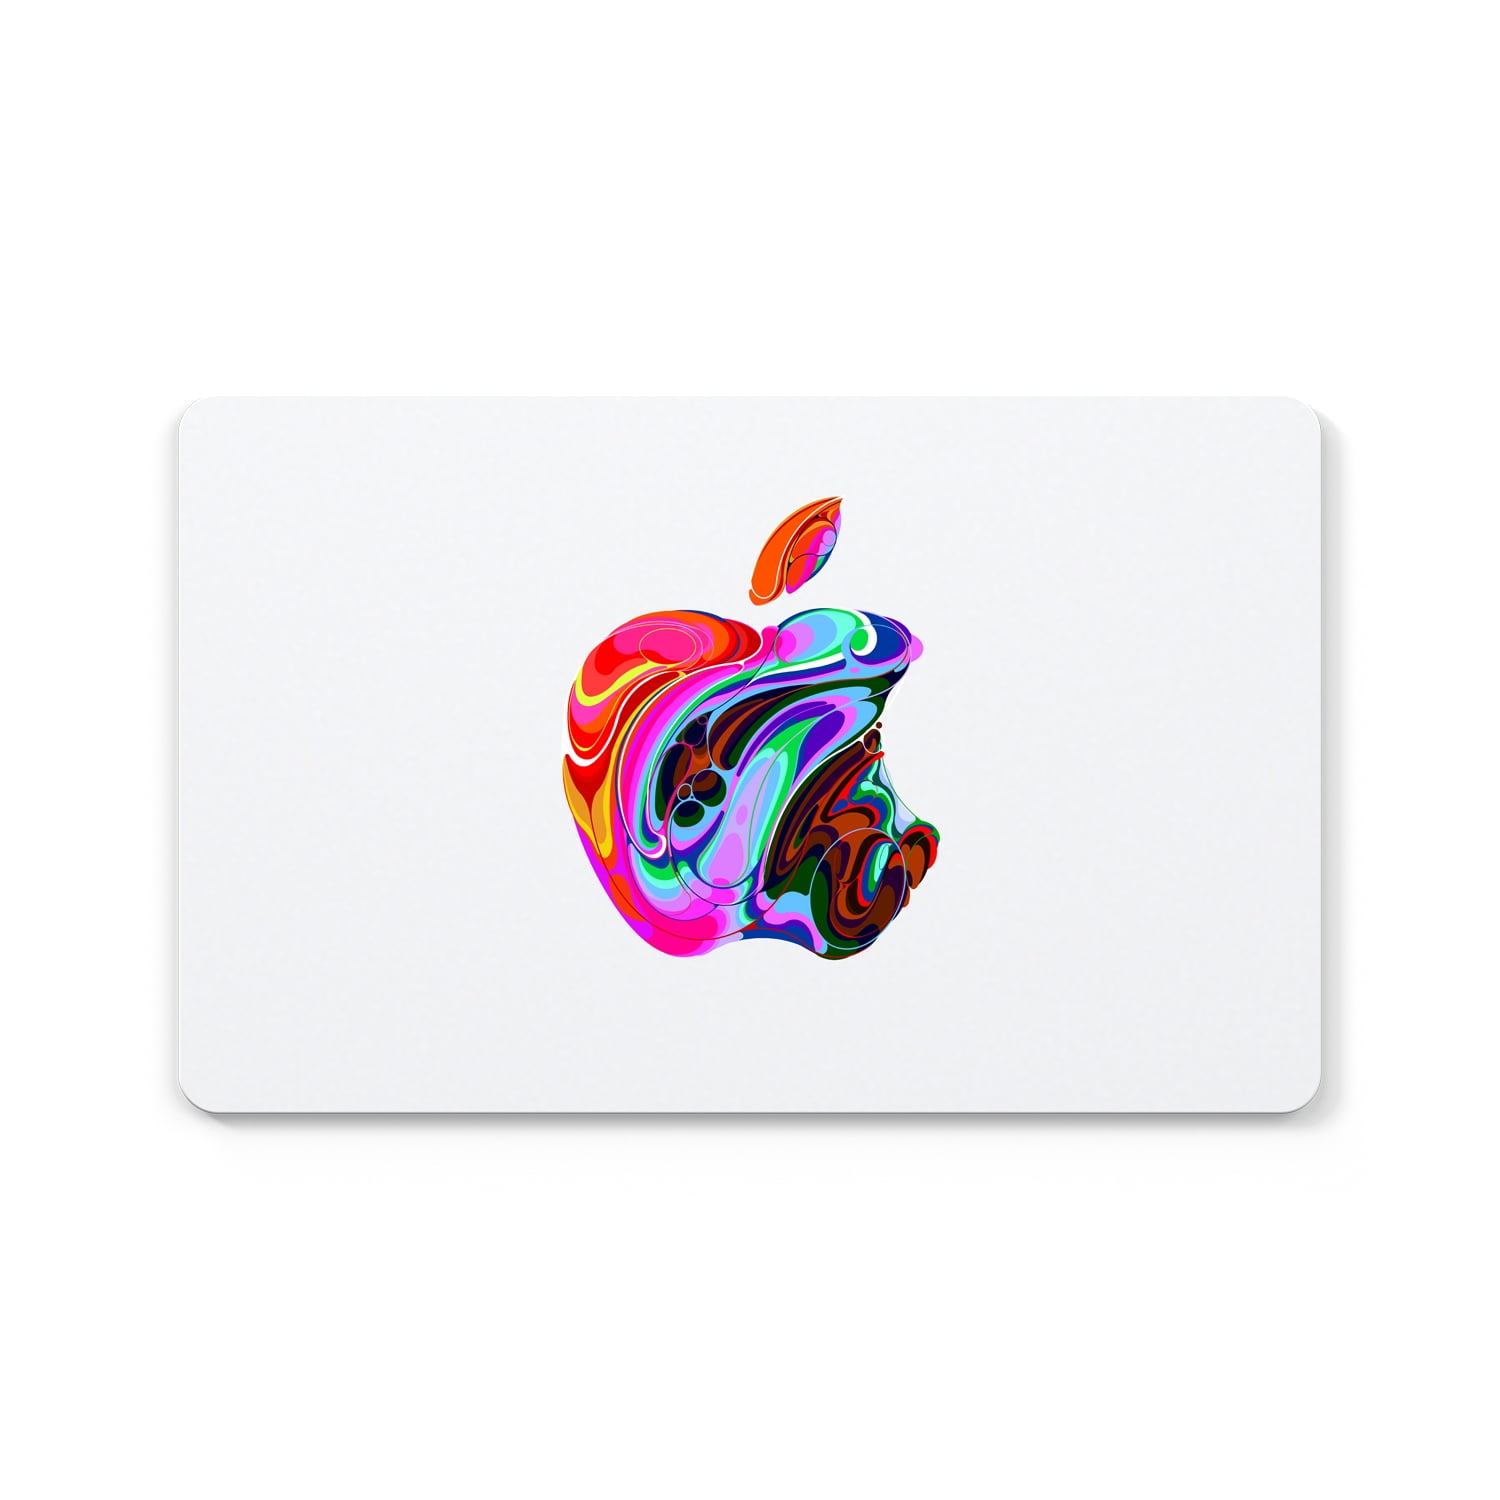 $100 Gift Card Delivery) (Email Apple